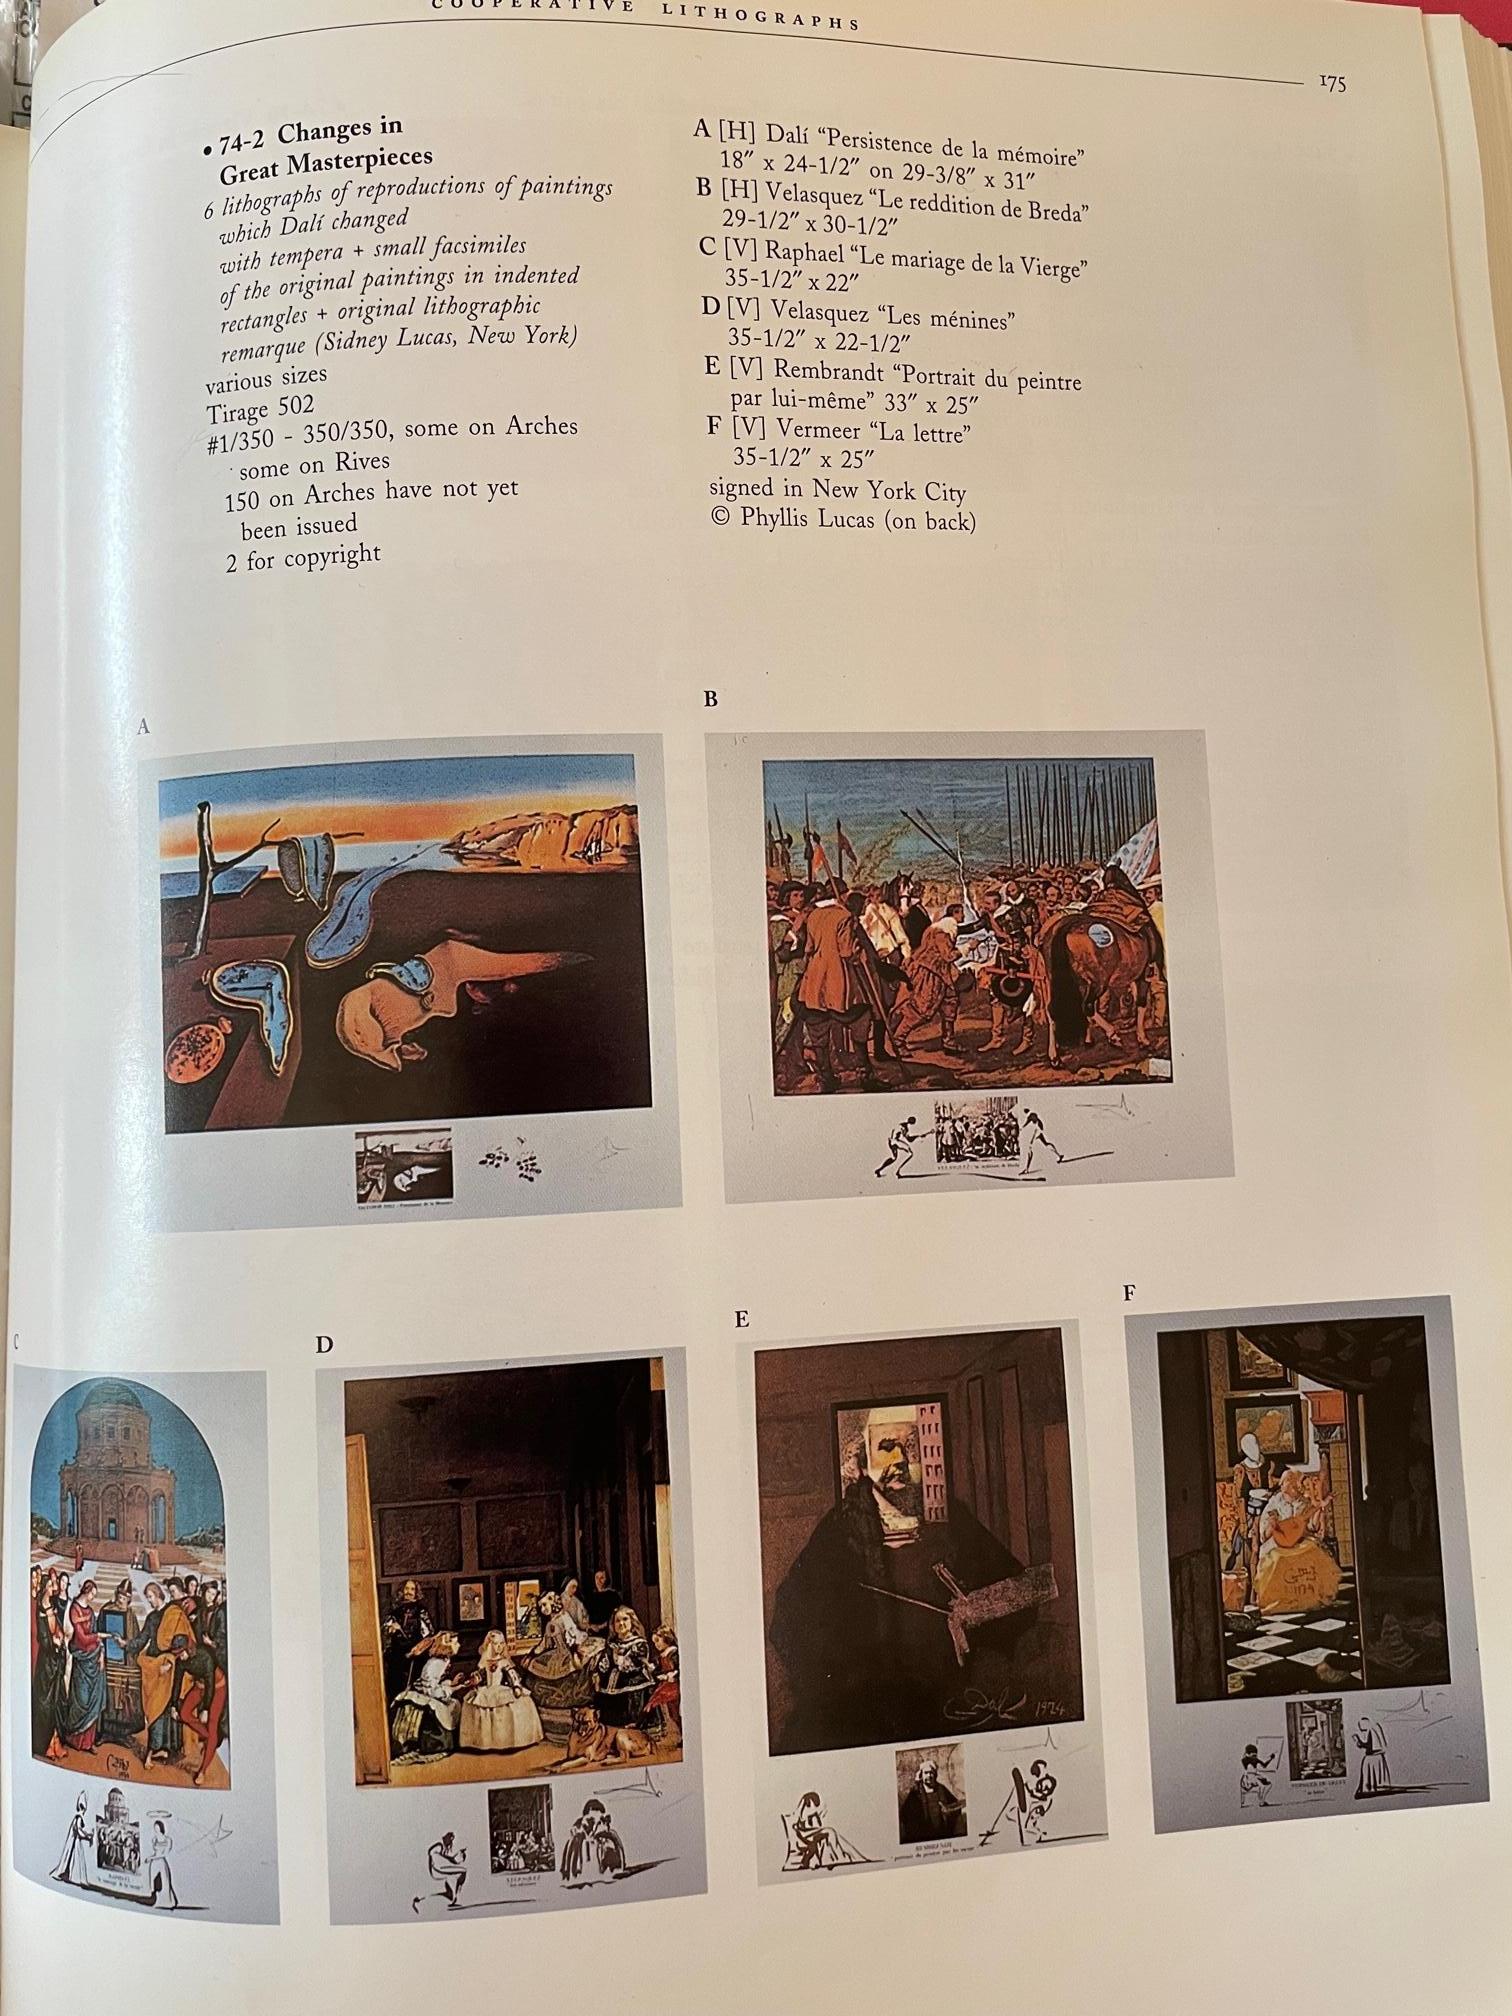 Vermeer La Lettre from Changes in Great Masterpieces 2